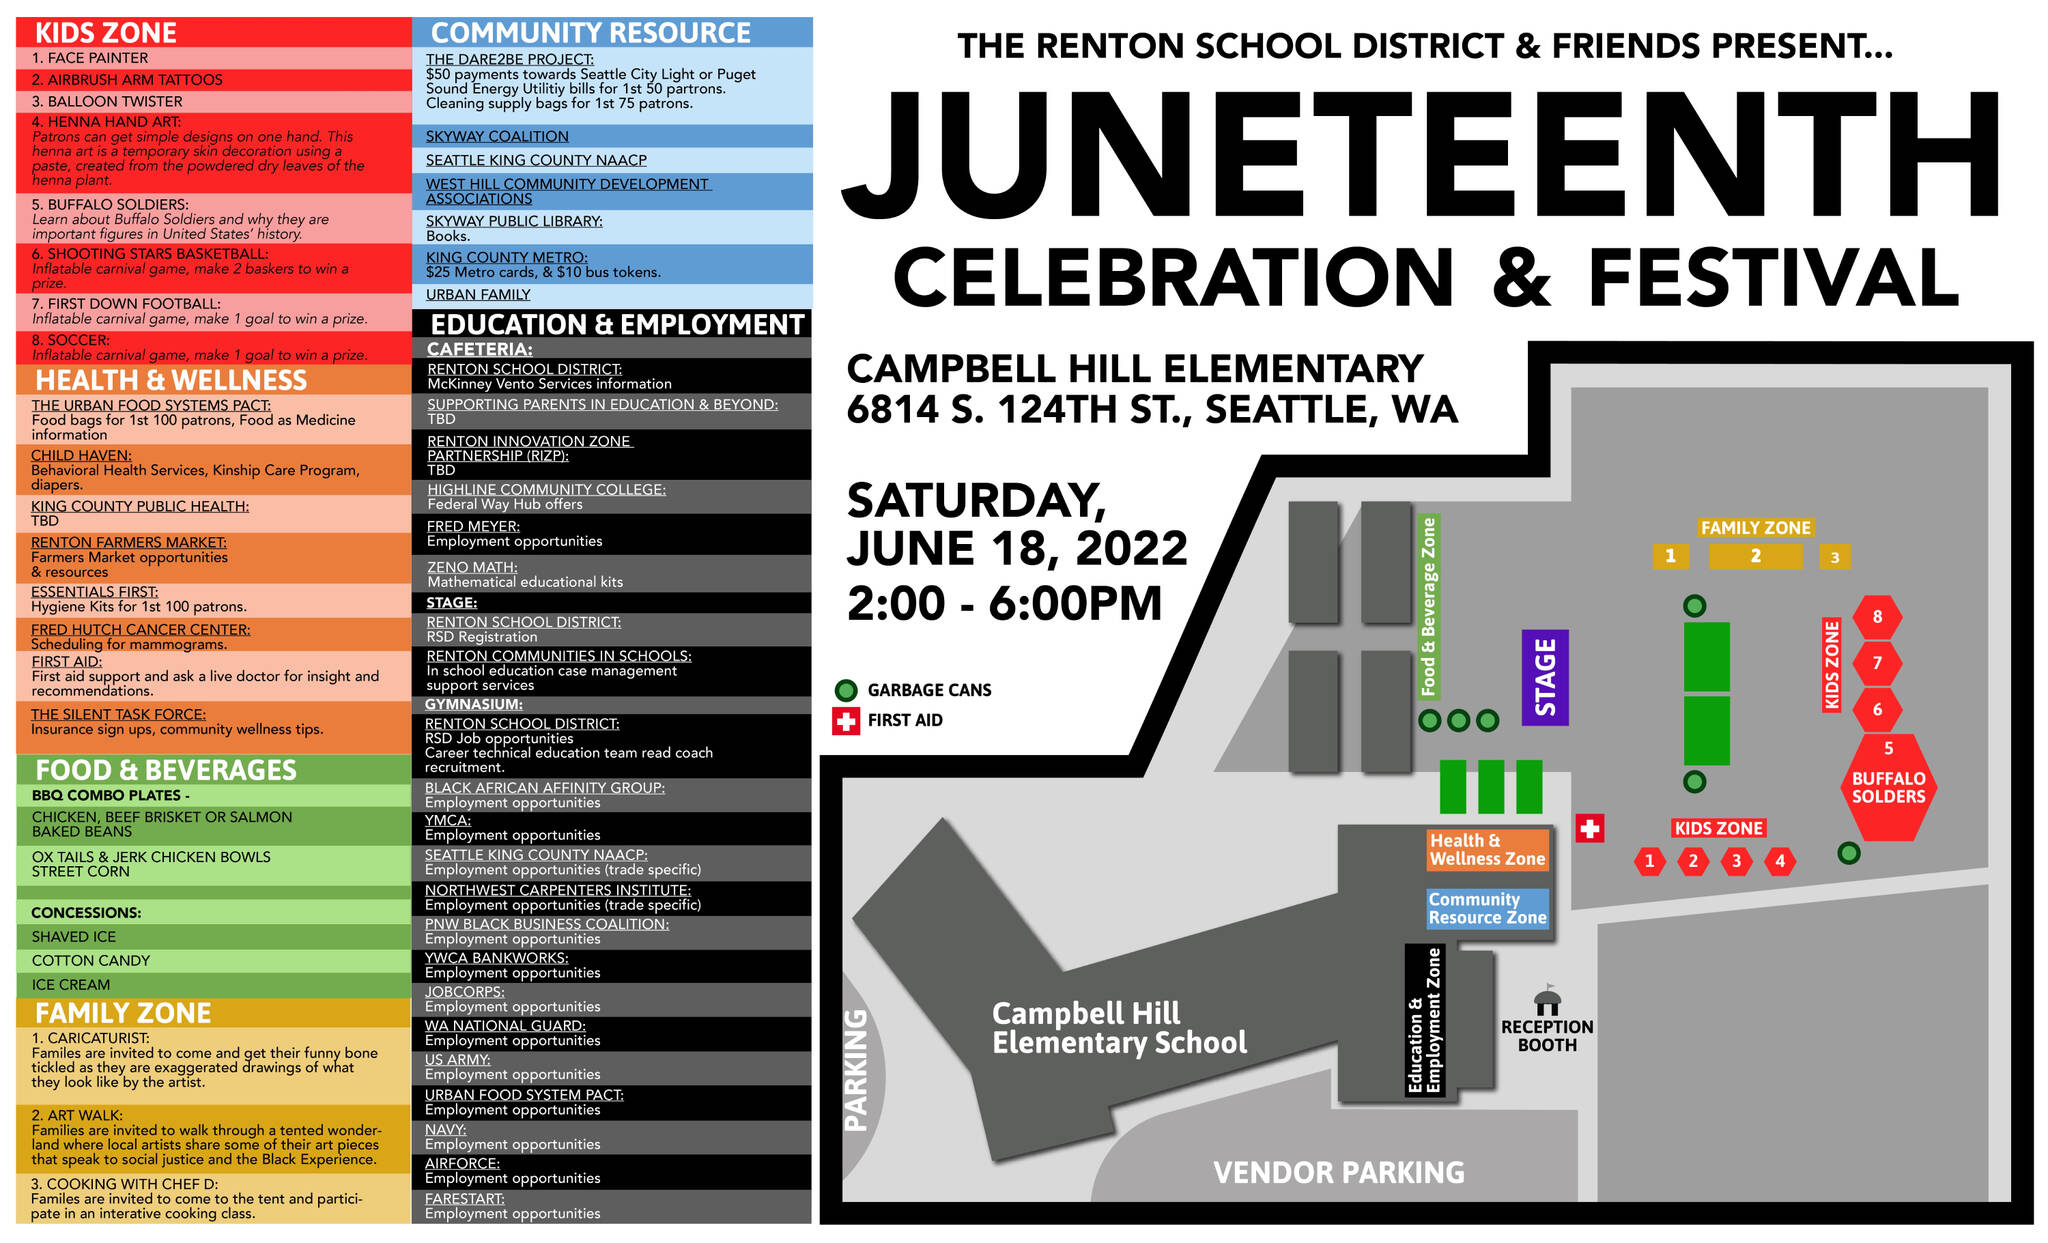 The Juneteenth Celebration and Festival 2022 at Campbell Hill Elementary School will offer food, fun, and important services for Renton's Black community. Photo courtesy of the Renton School District.